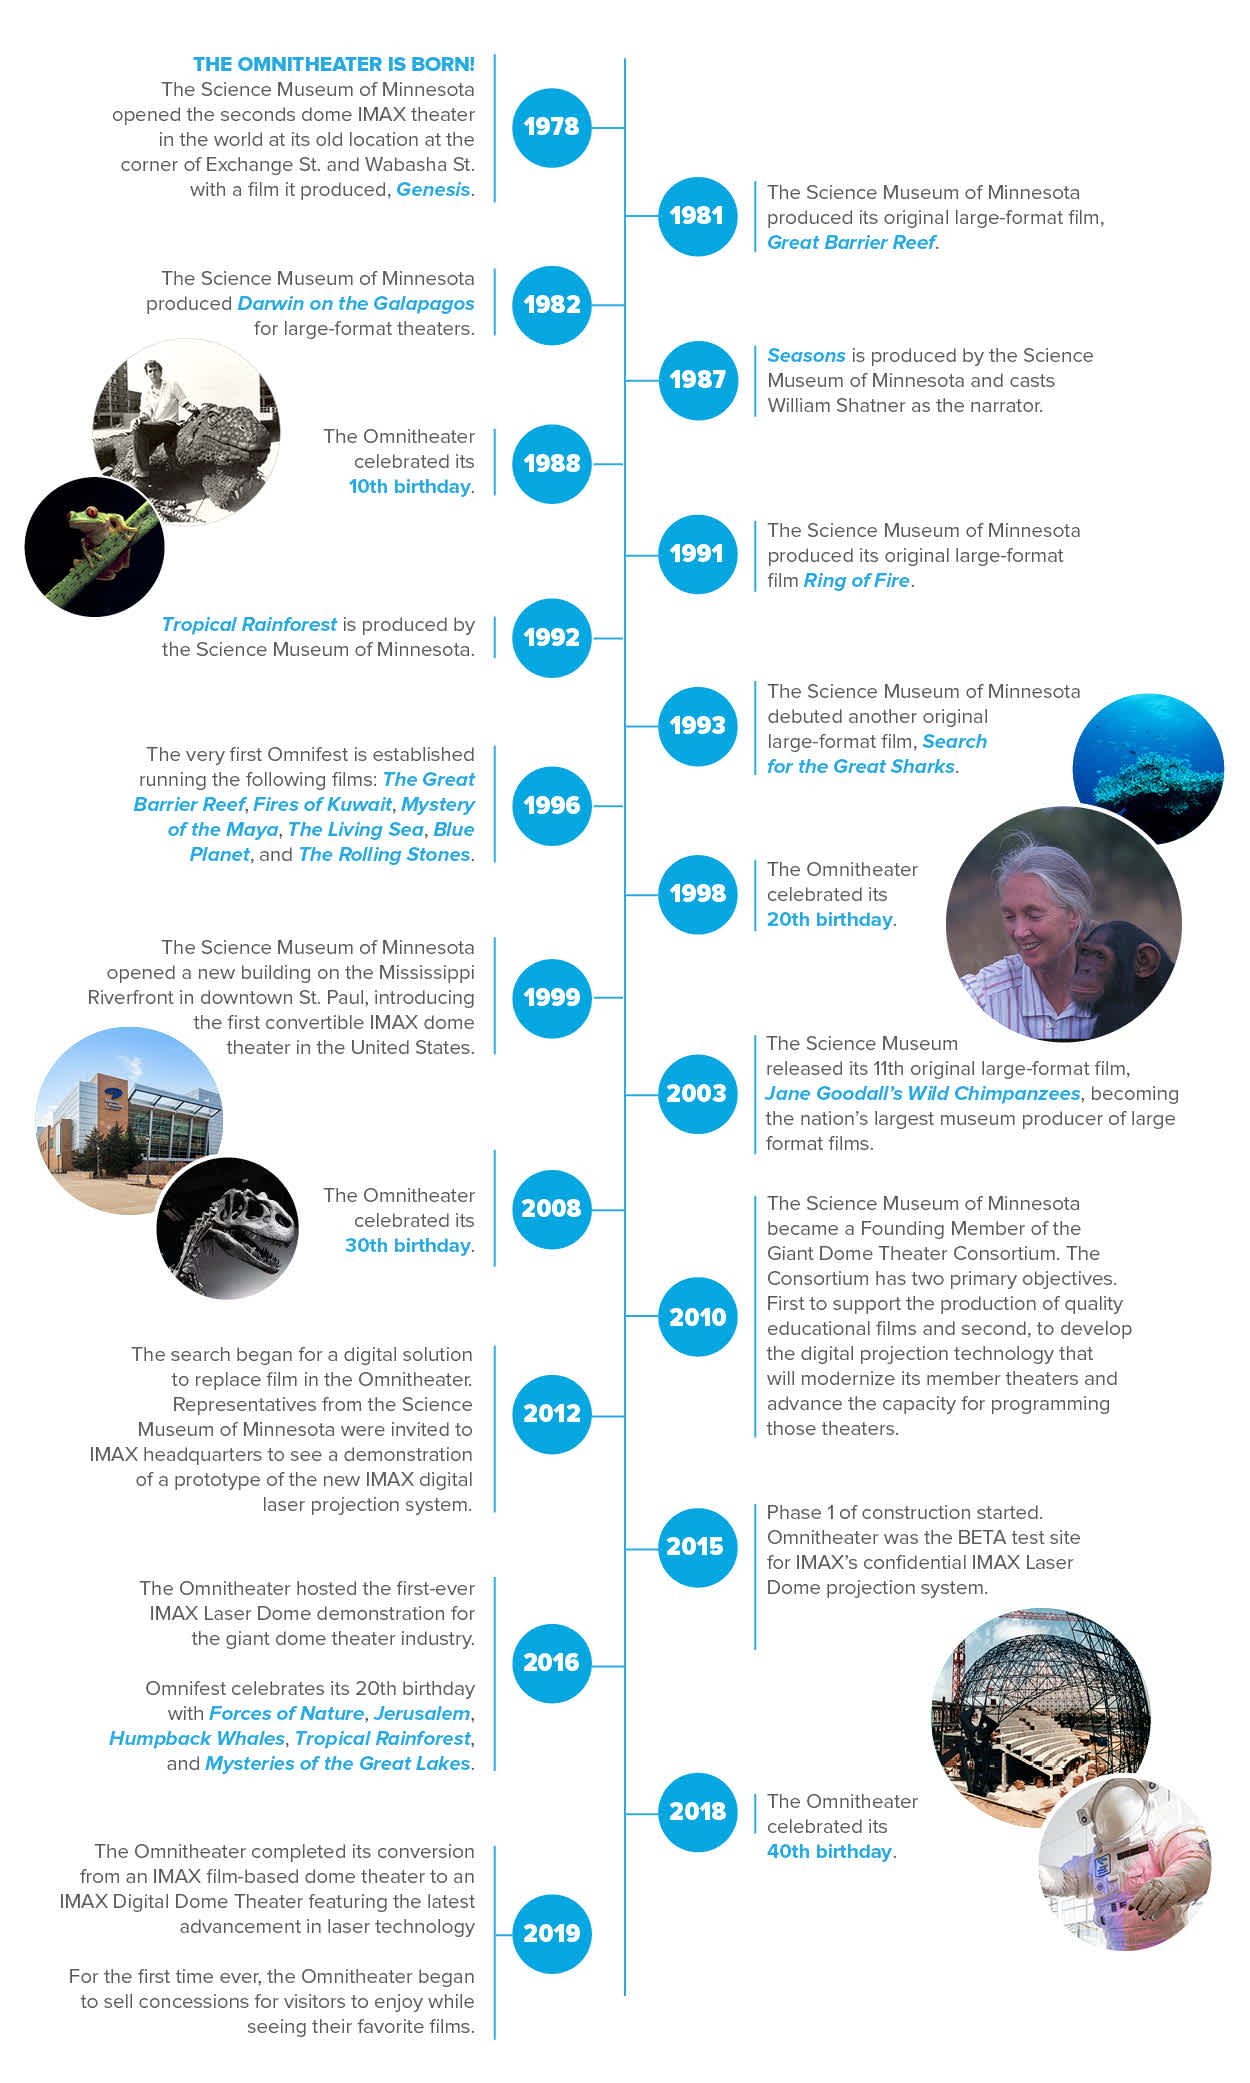 A timeline that details historical facts concerning the Omnitheater